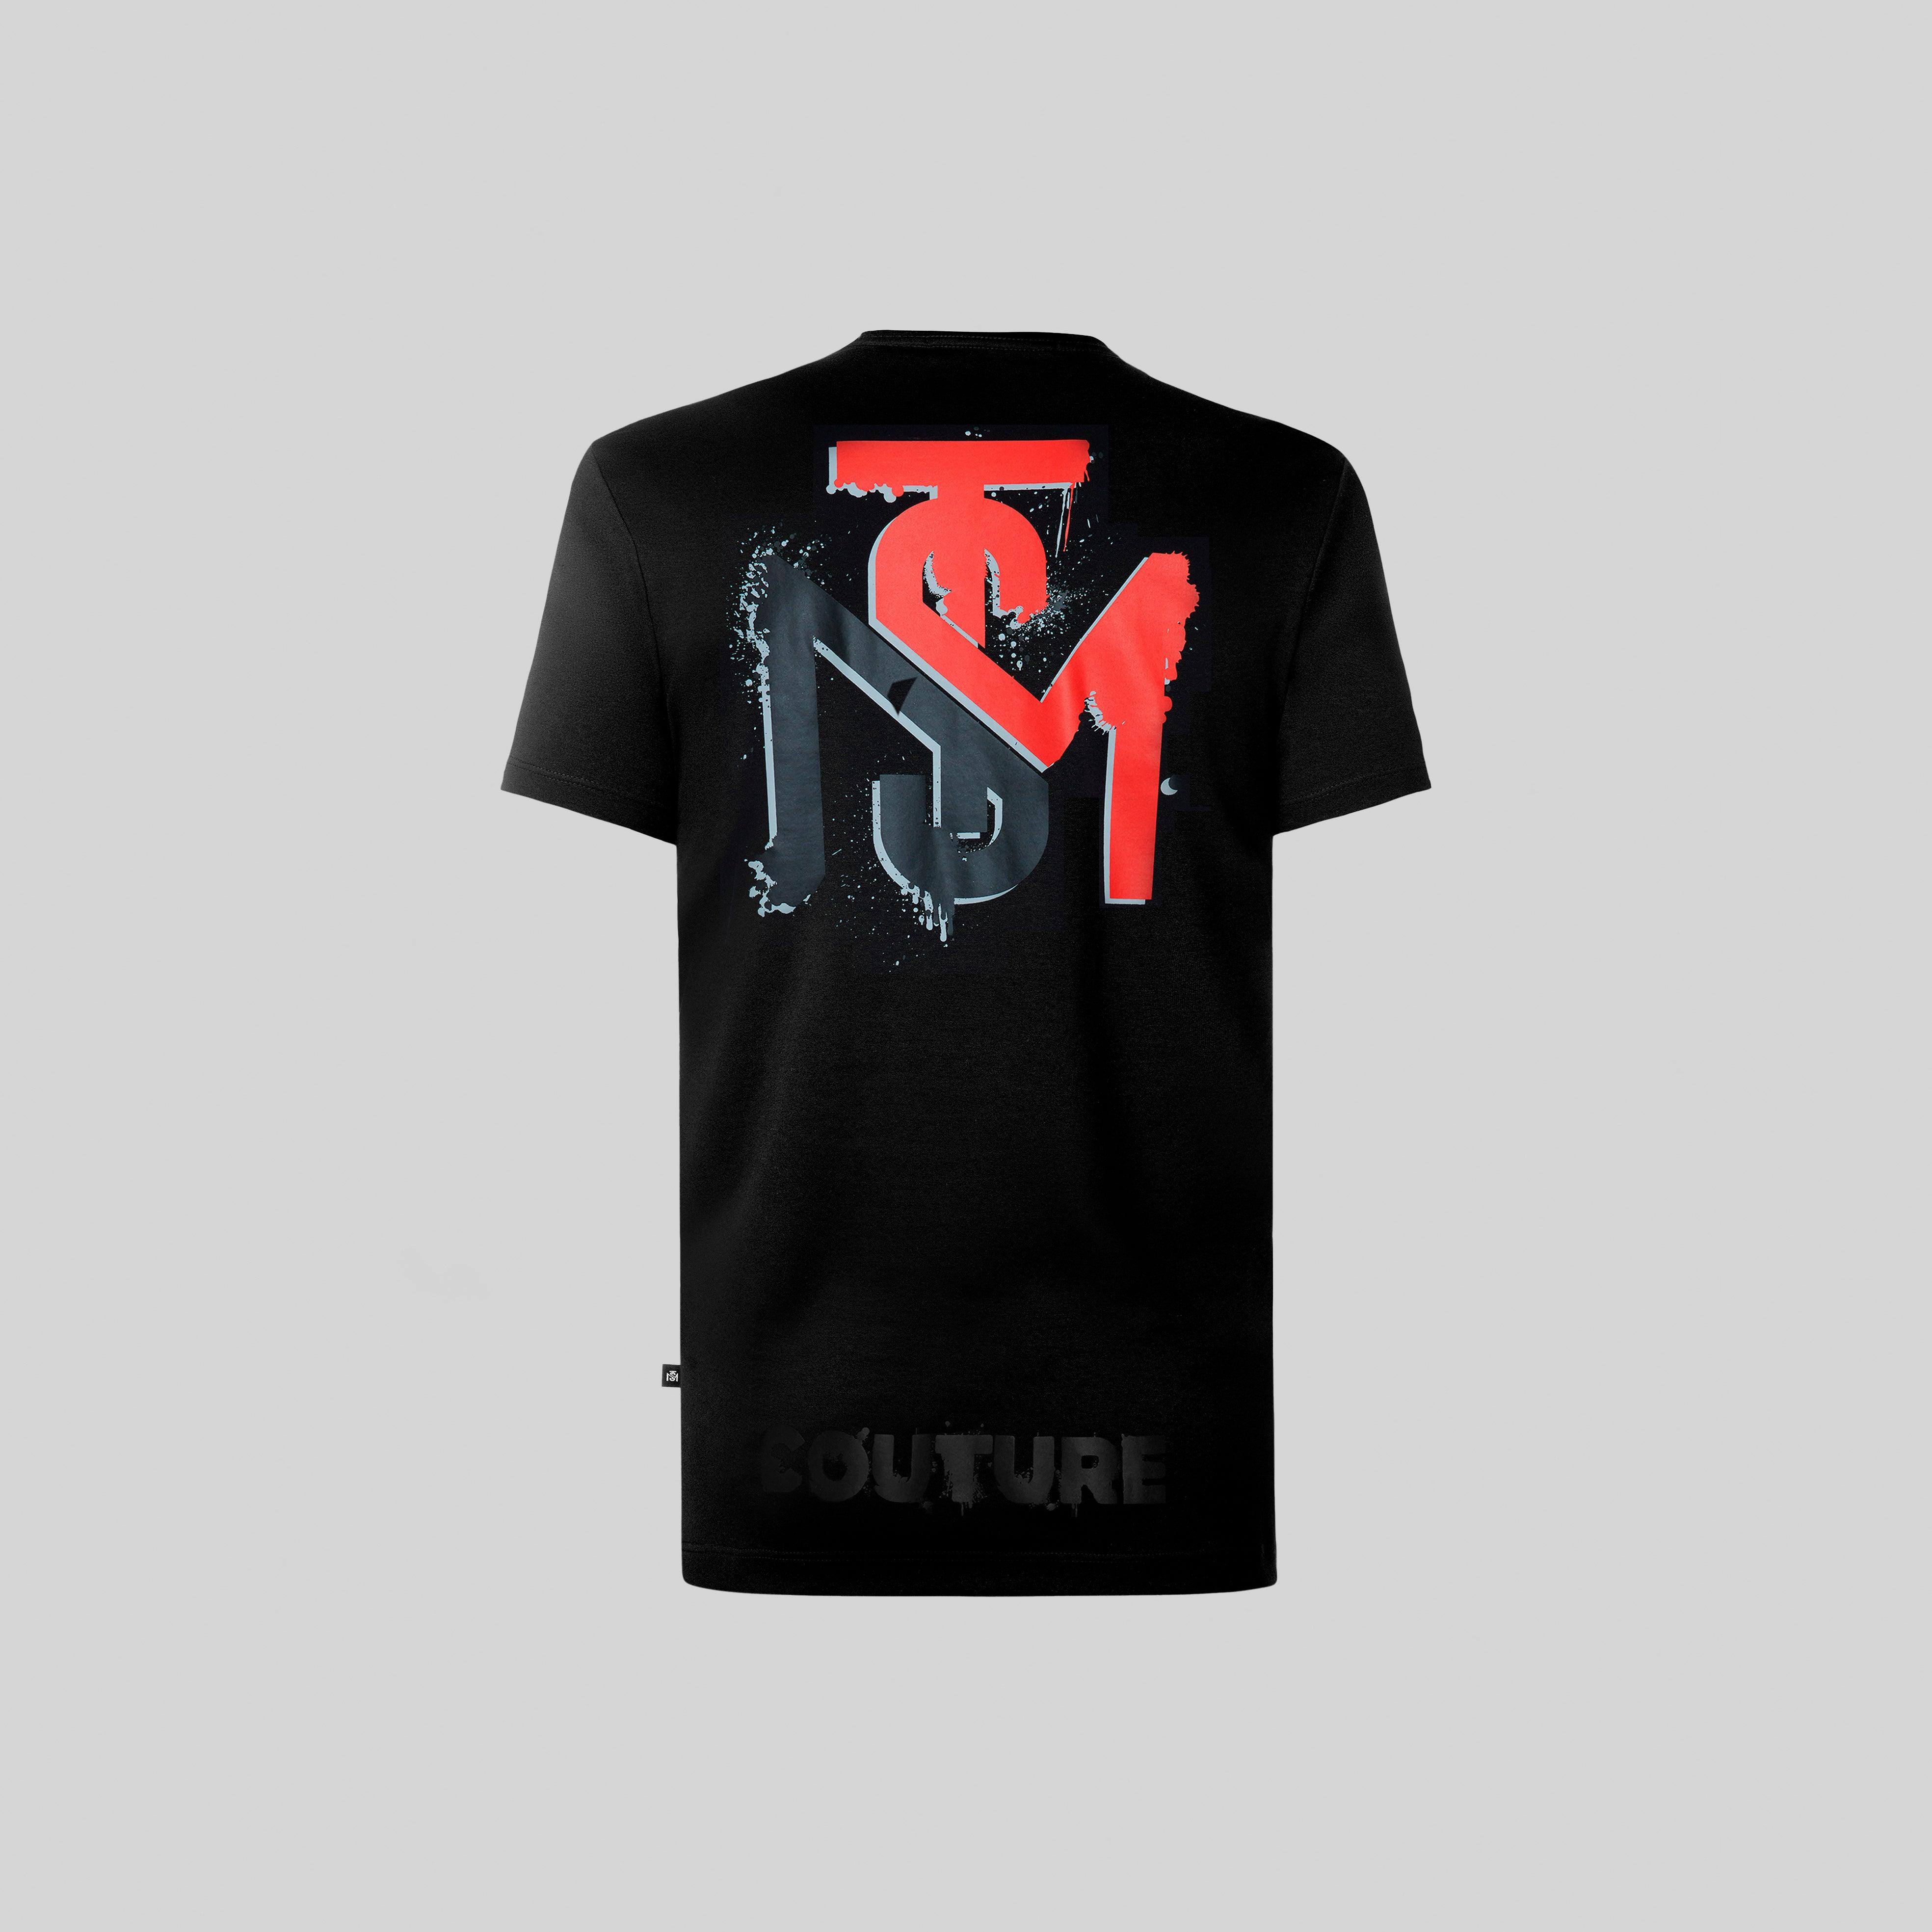 CONQUER T-SHIRT BLACK | Monastery Couture